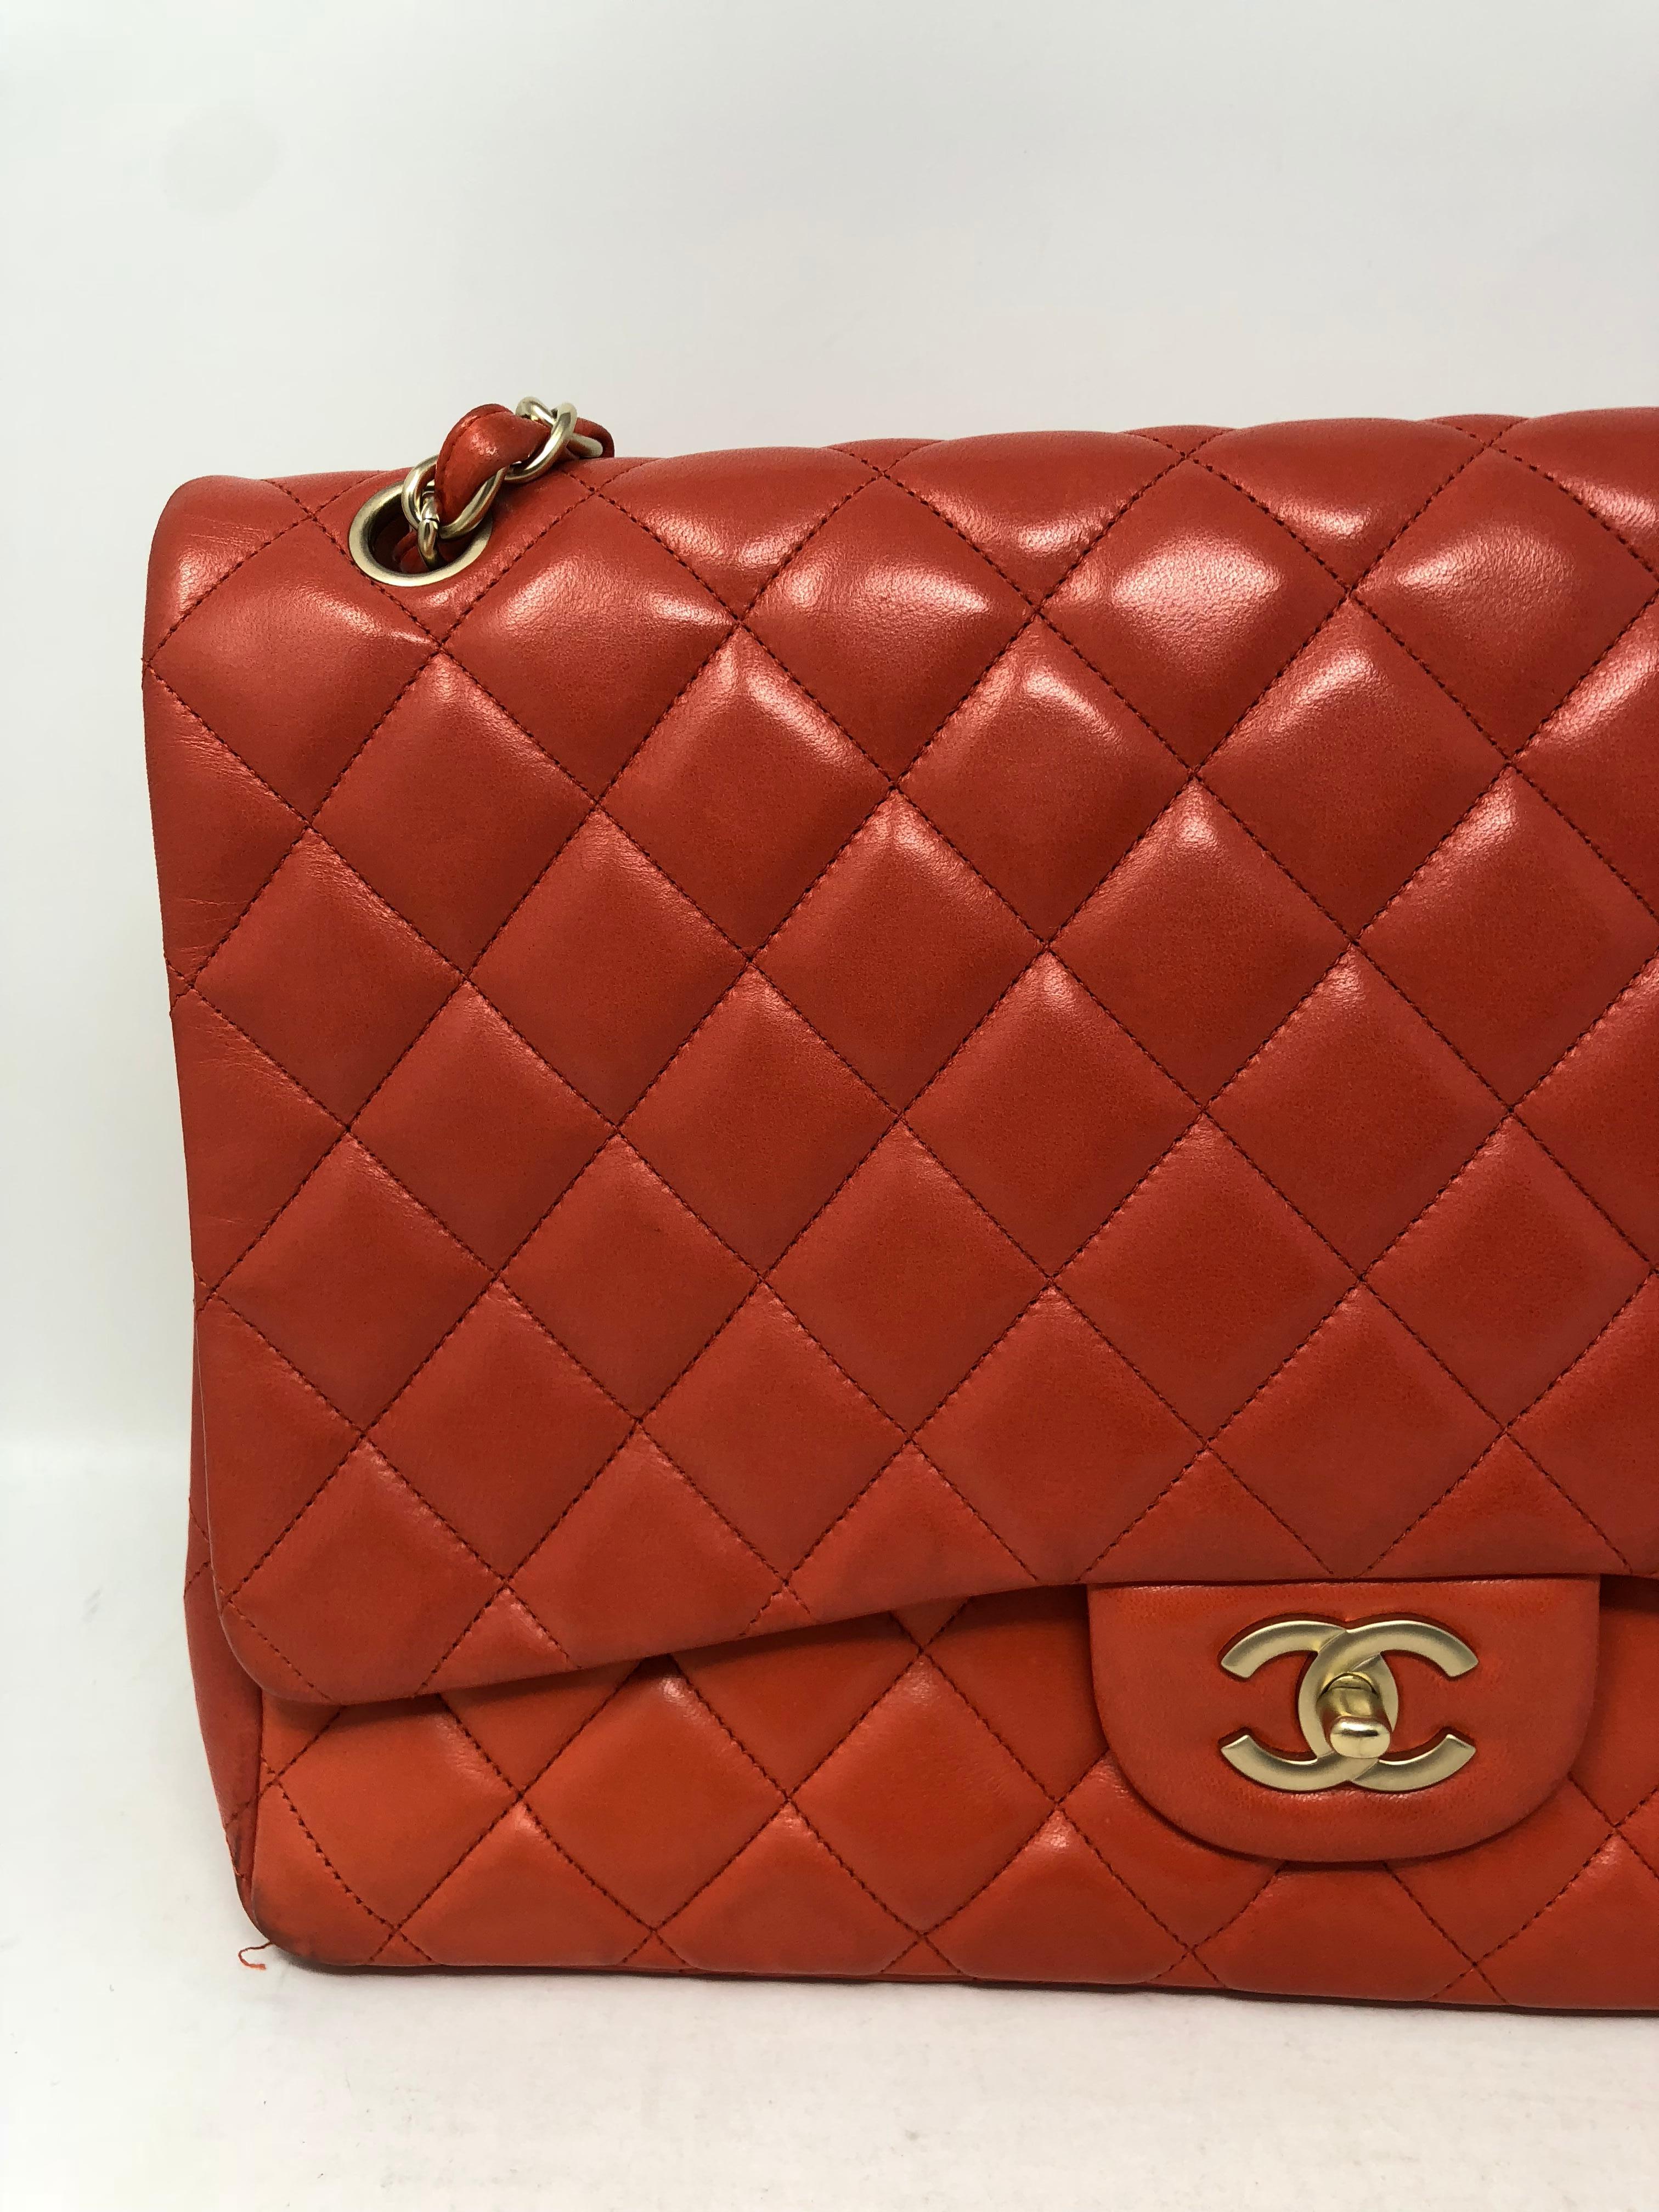 Red Chanel Coral Maxi Bag